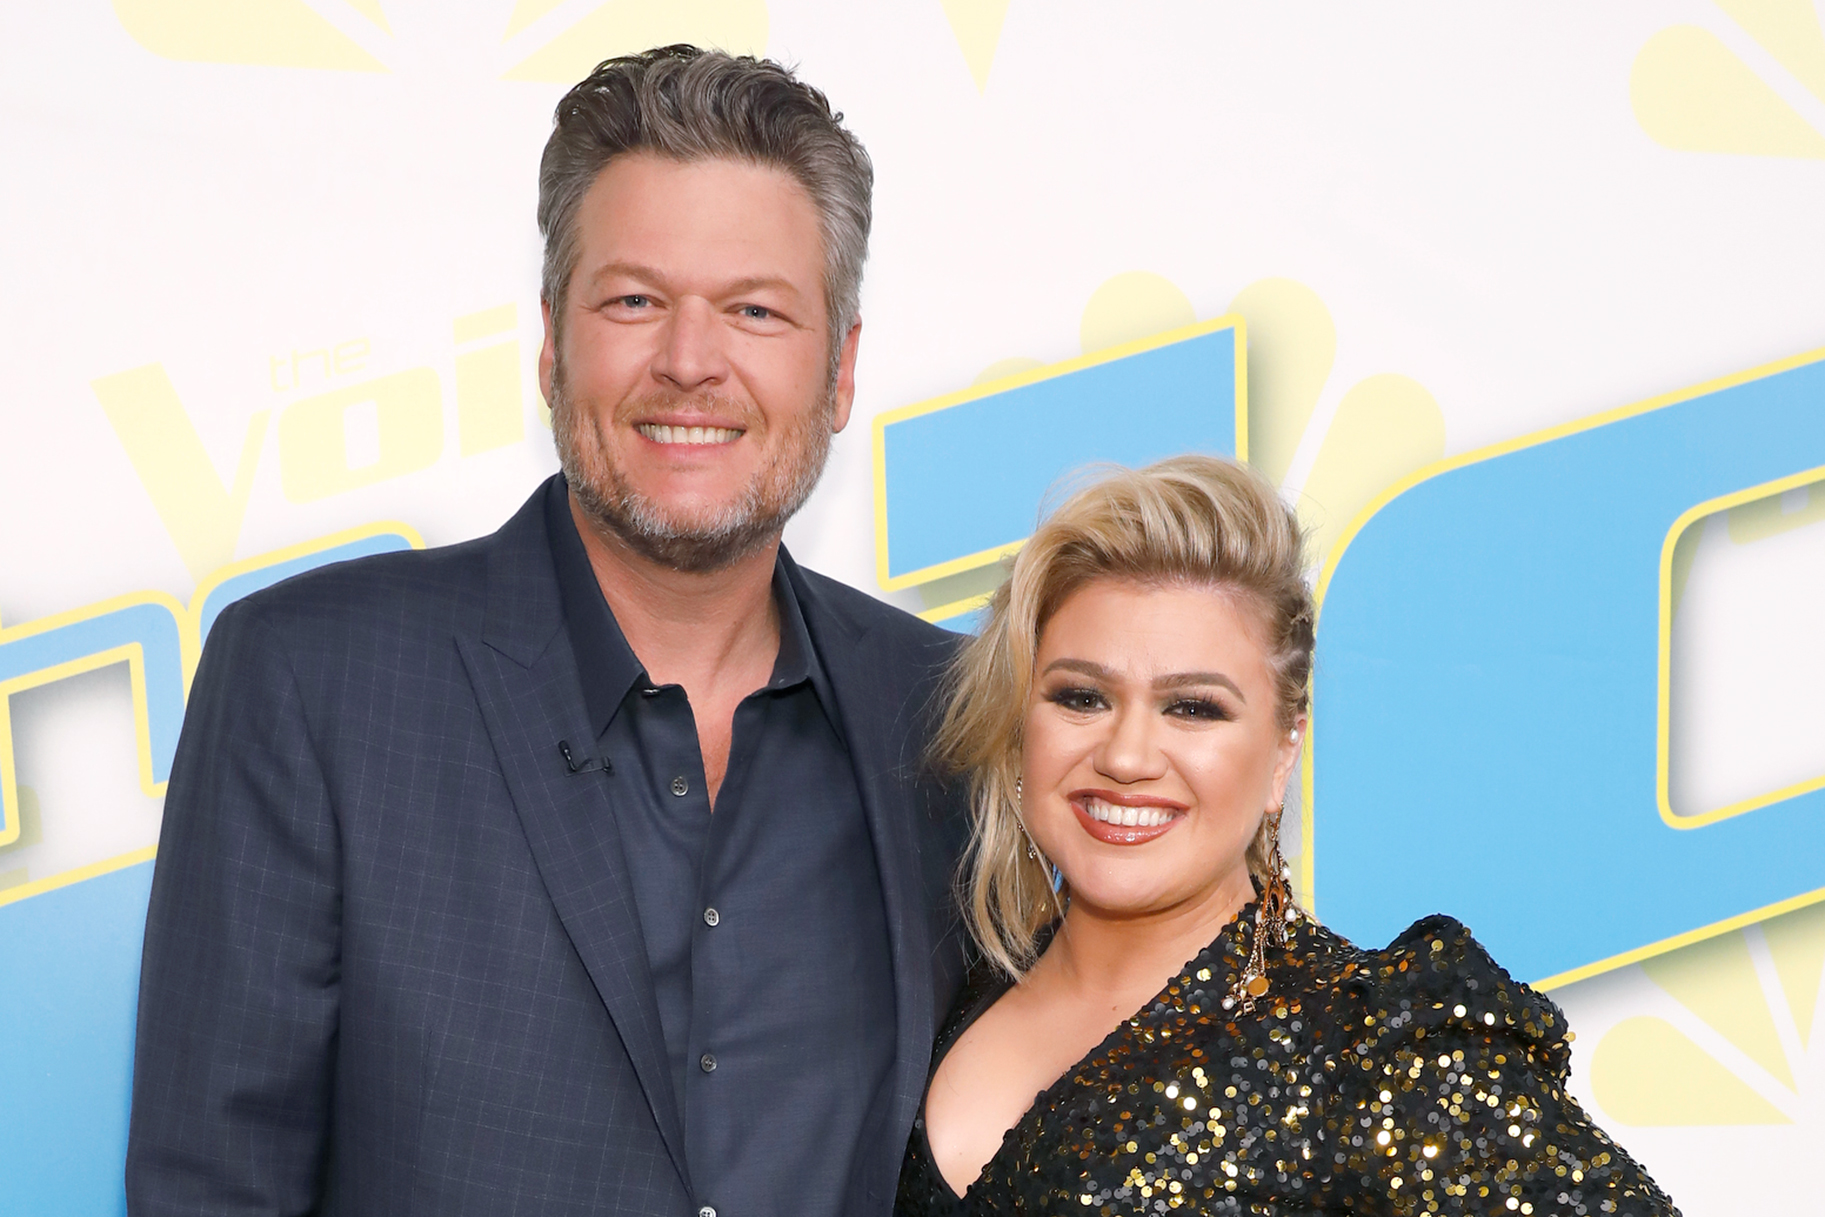 Kelly Clarkson covers a Blake Shelton song